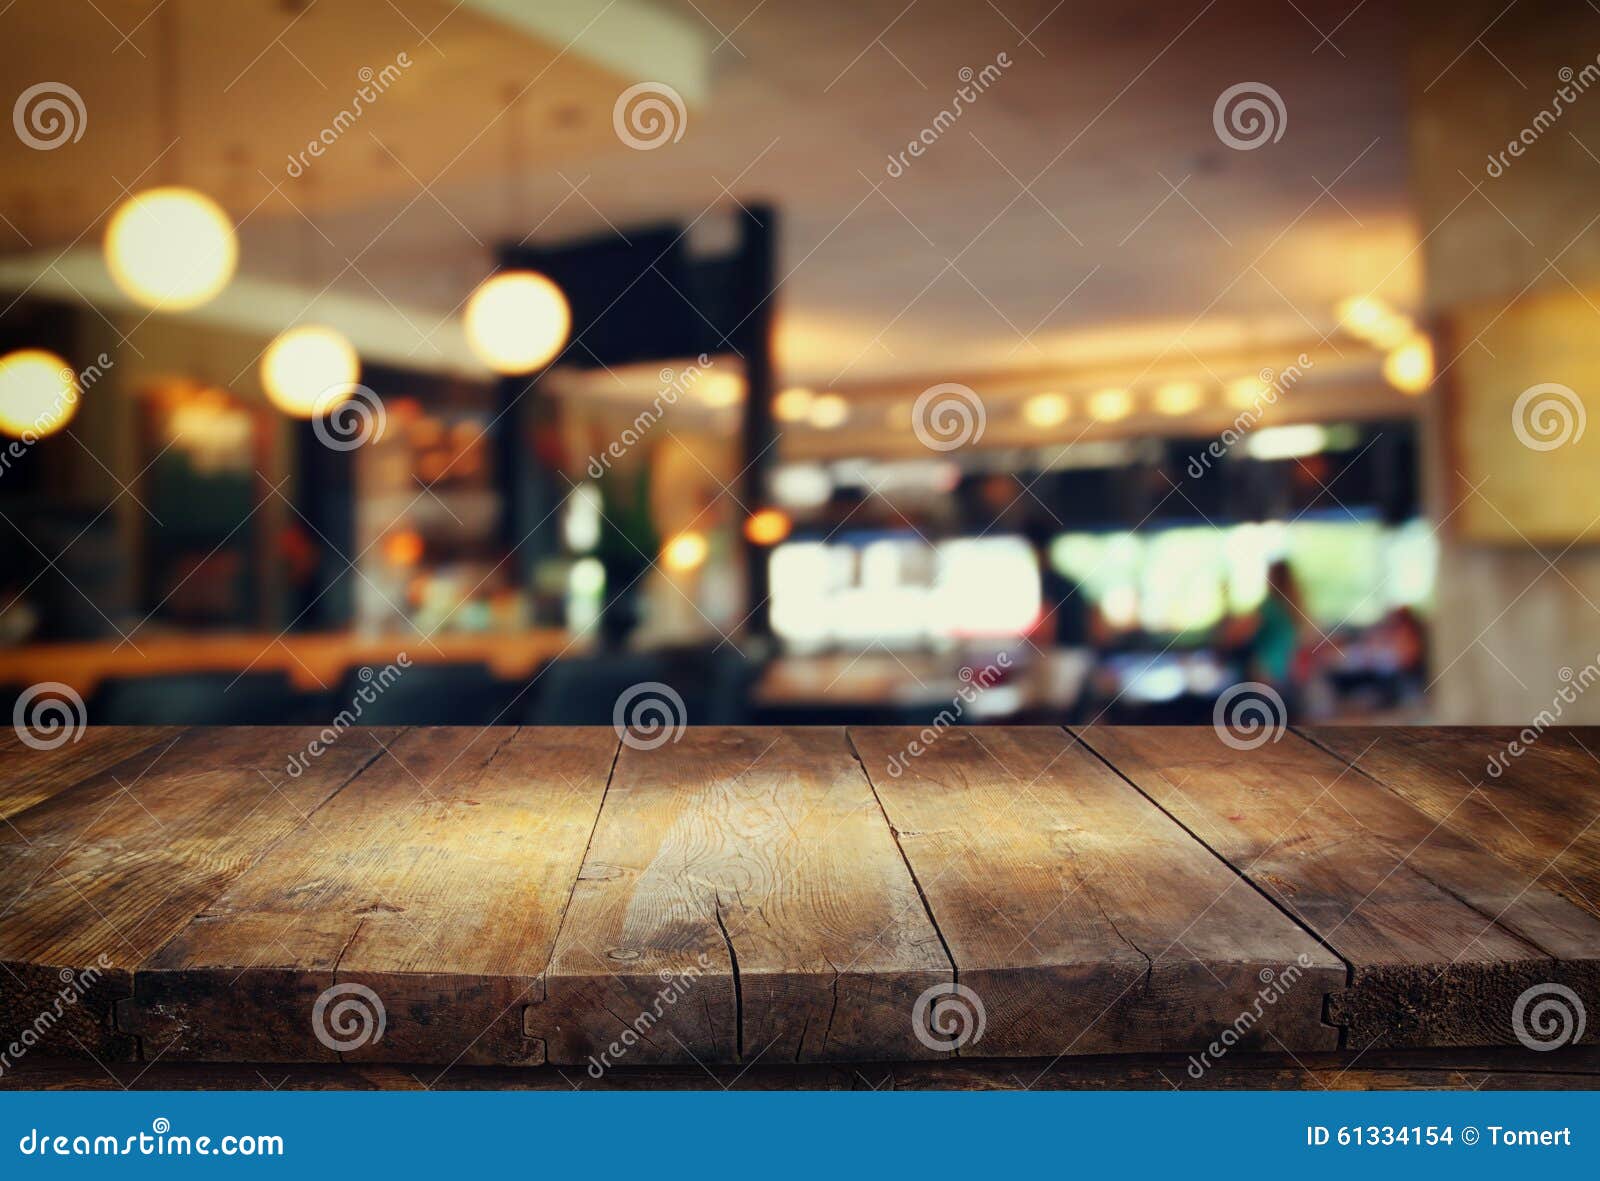 Image Of Wooden Table In Front Of Abstract Blurred Background Of Restaurant  Lights Stock Photo 61334154 - Megapixl